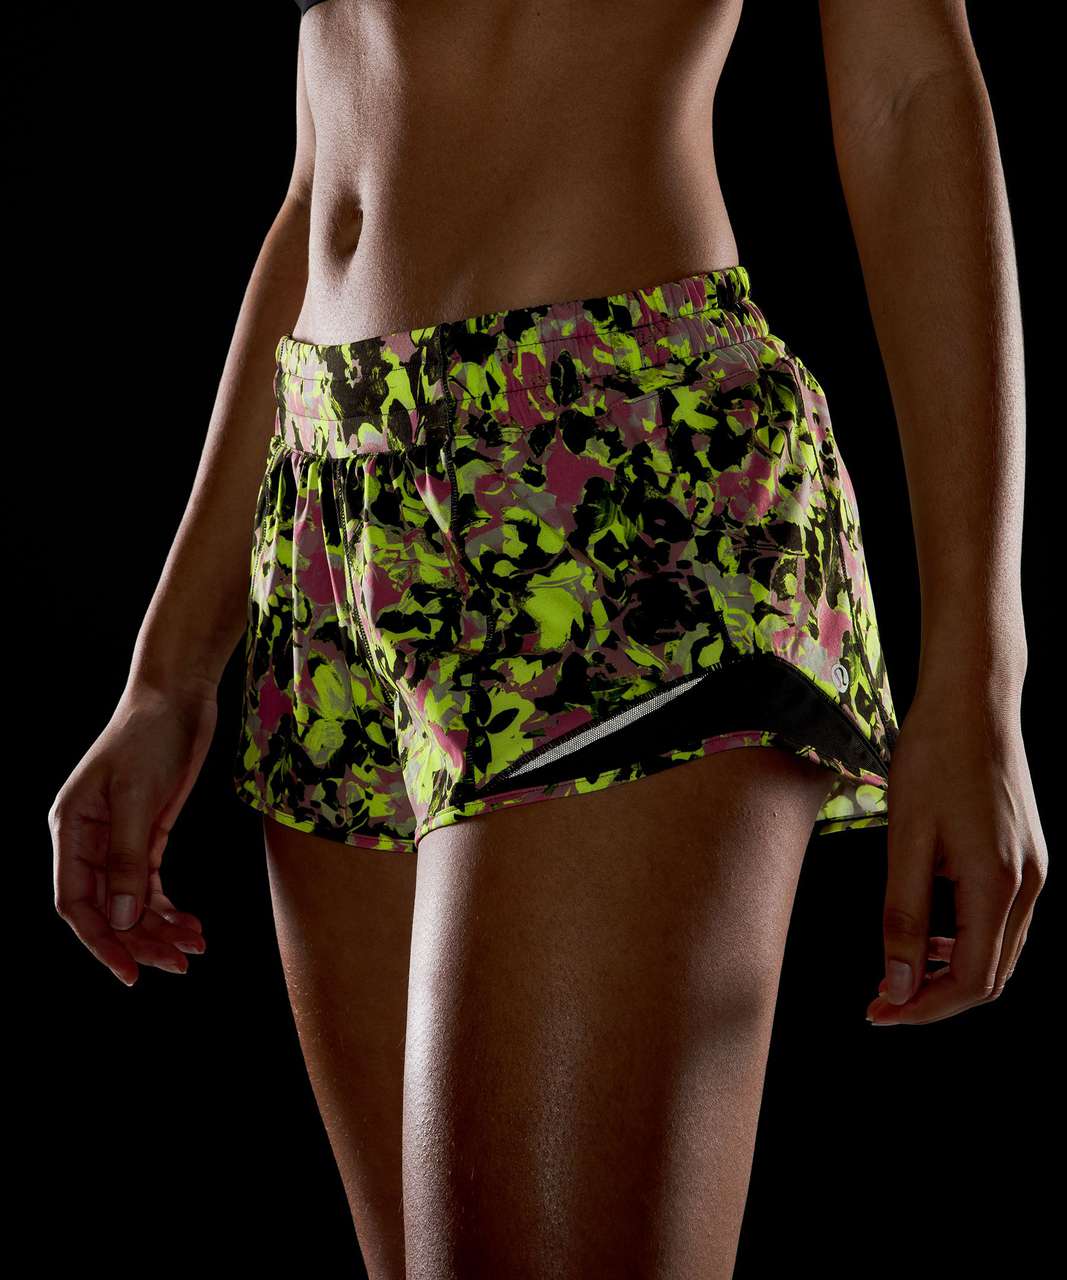 Lululemon Hotty Hot Low-Rise Lined Short 2.5" - Inflected Highlight Yellow Multi / Black